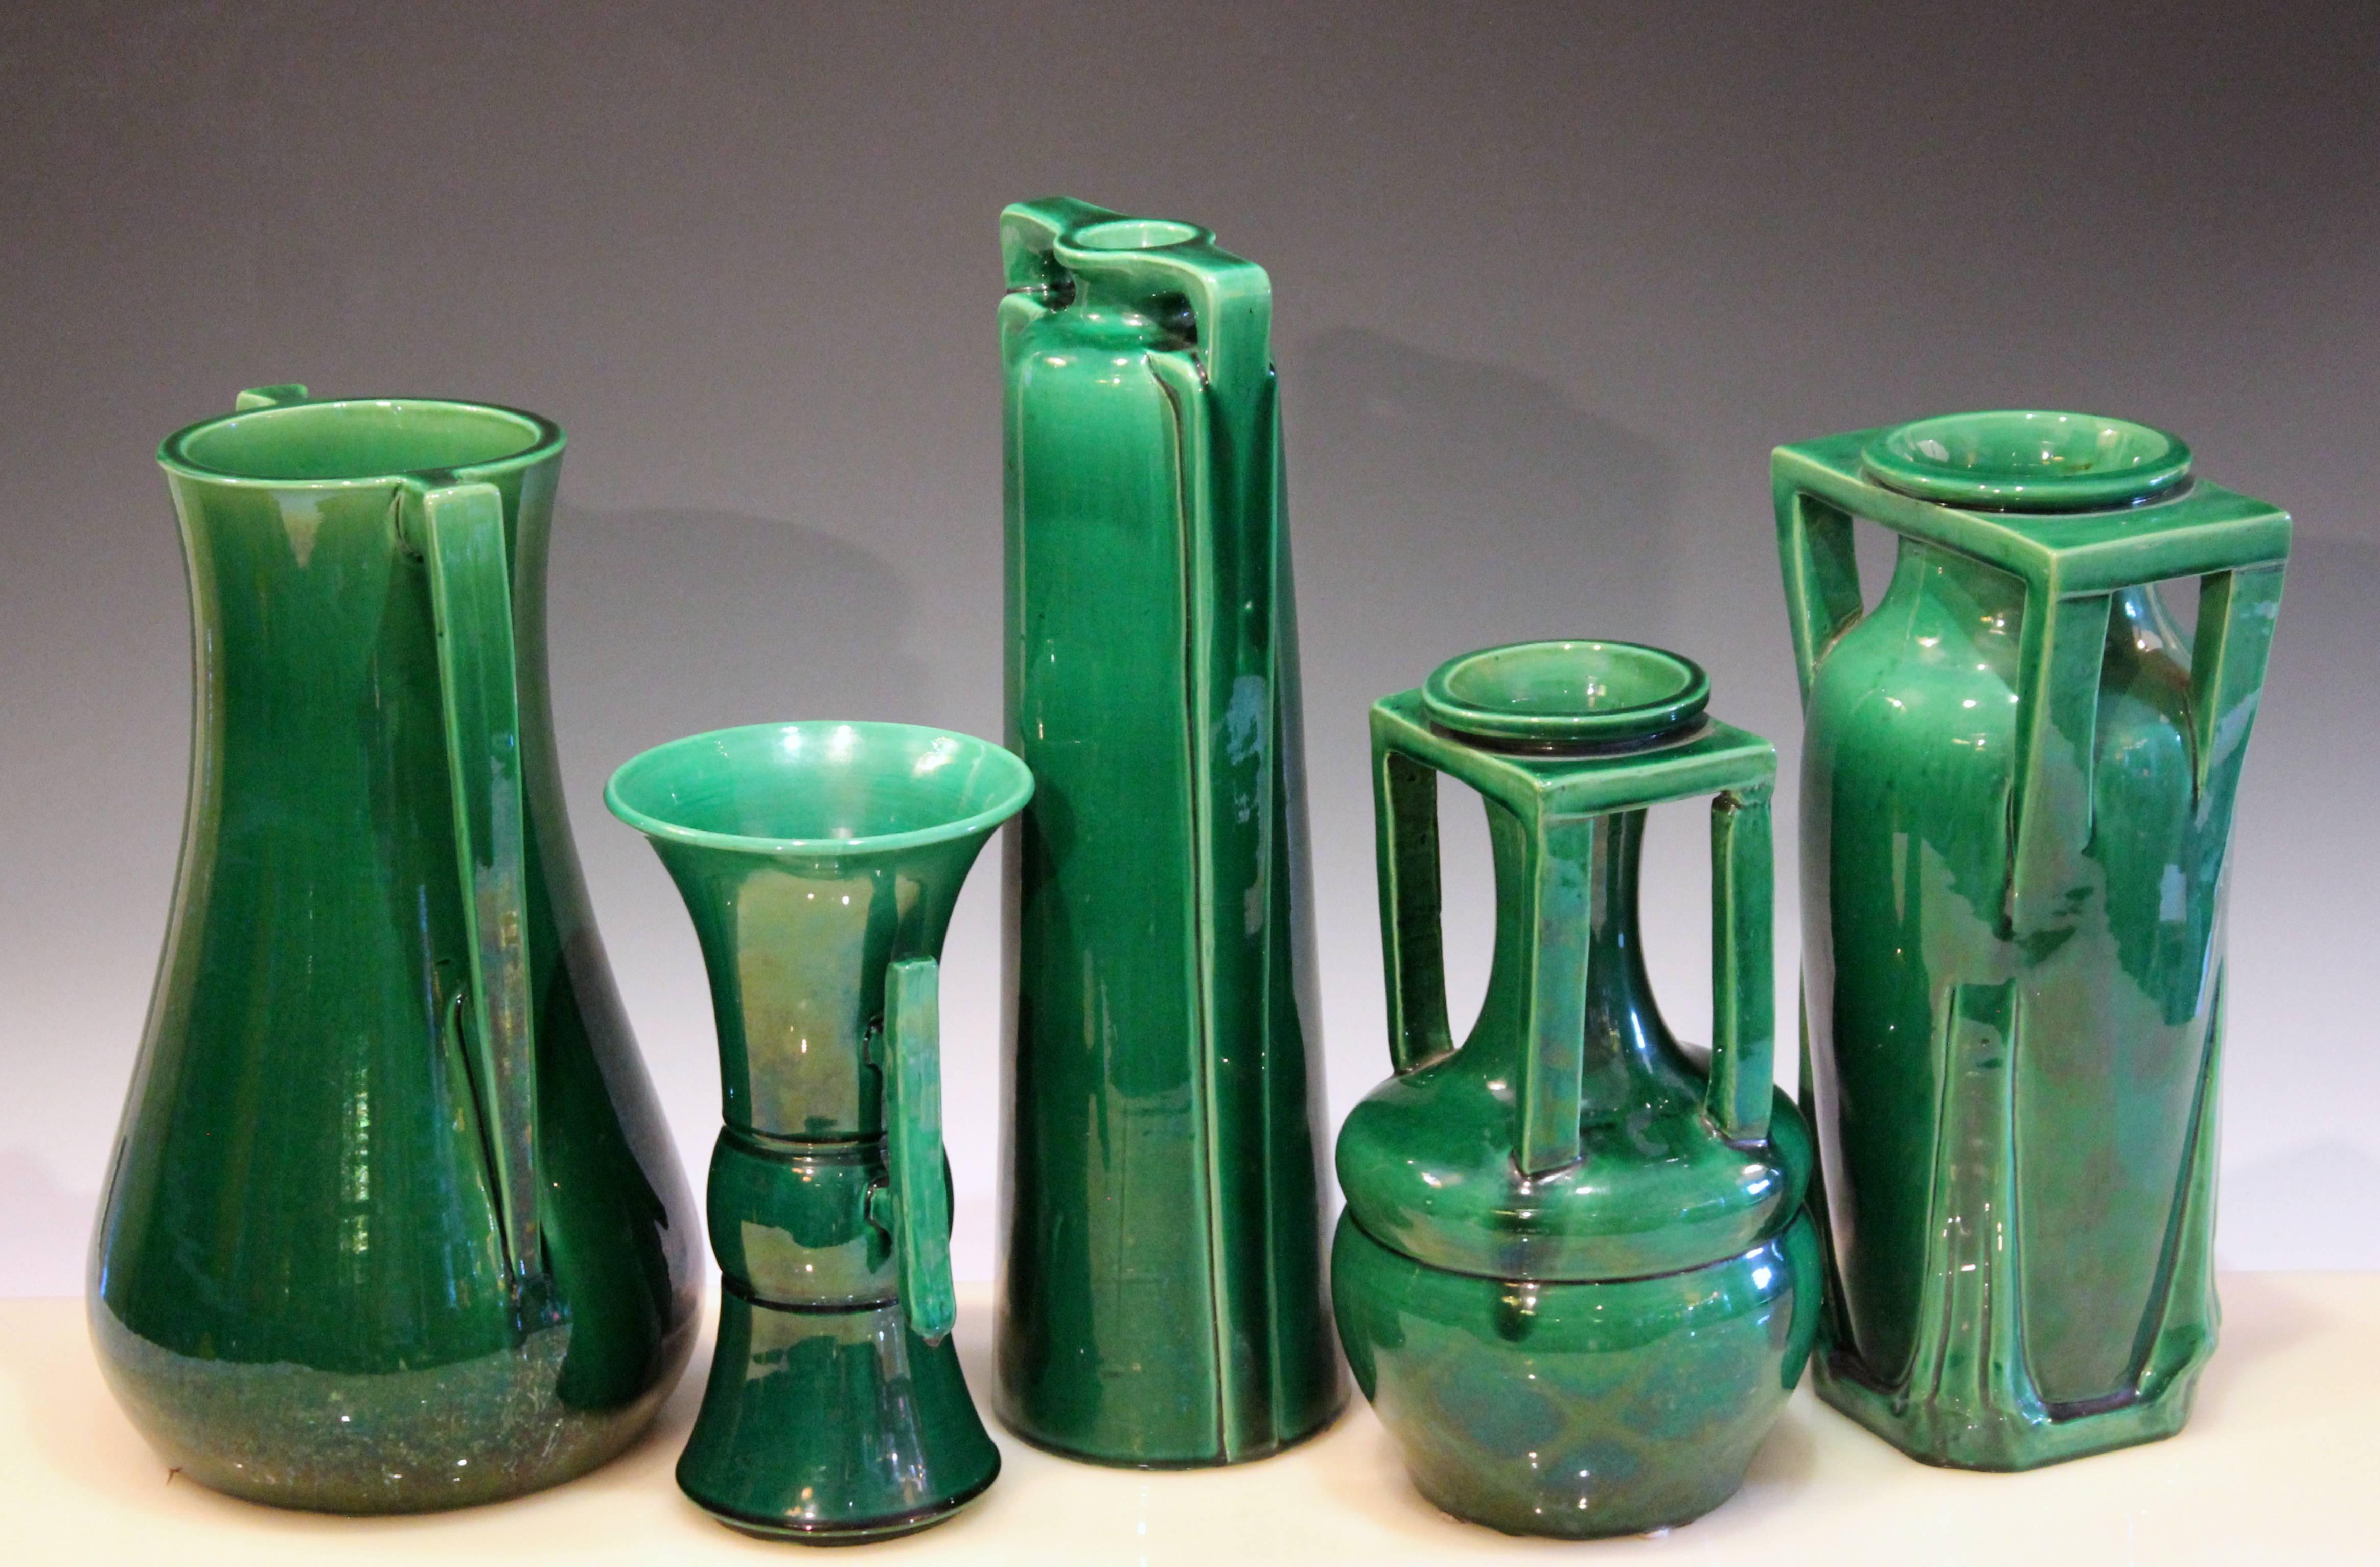 Turned Awaji Pottery Art Deco Architectural Buttress Handled Vases, circa 1920